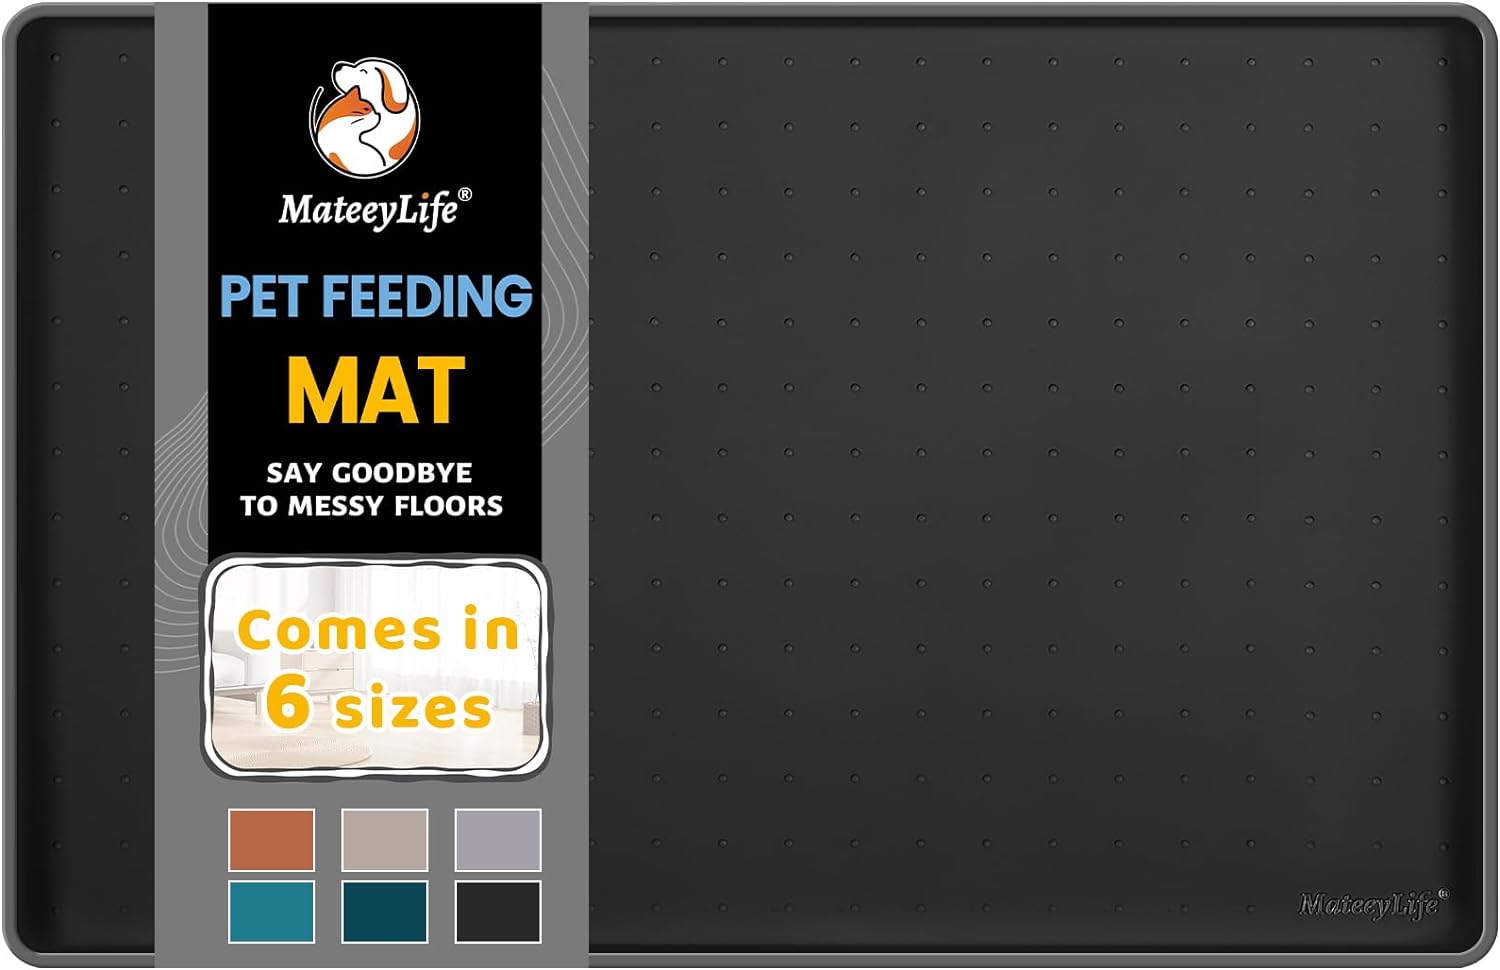 Exclusive Savings for You - MateeyLife Silicone Cat, 15% Off! Limited Stock!